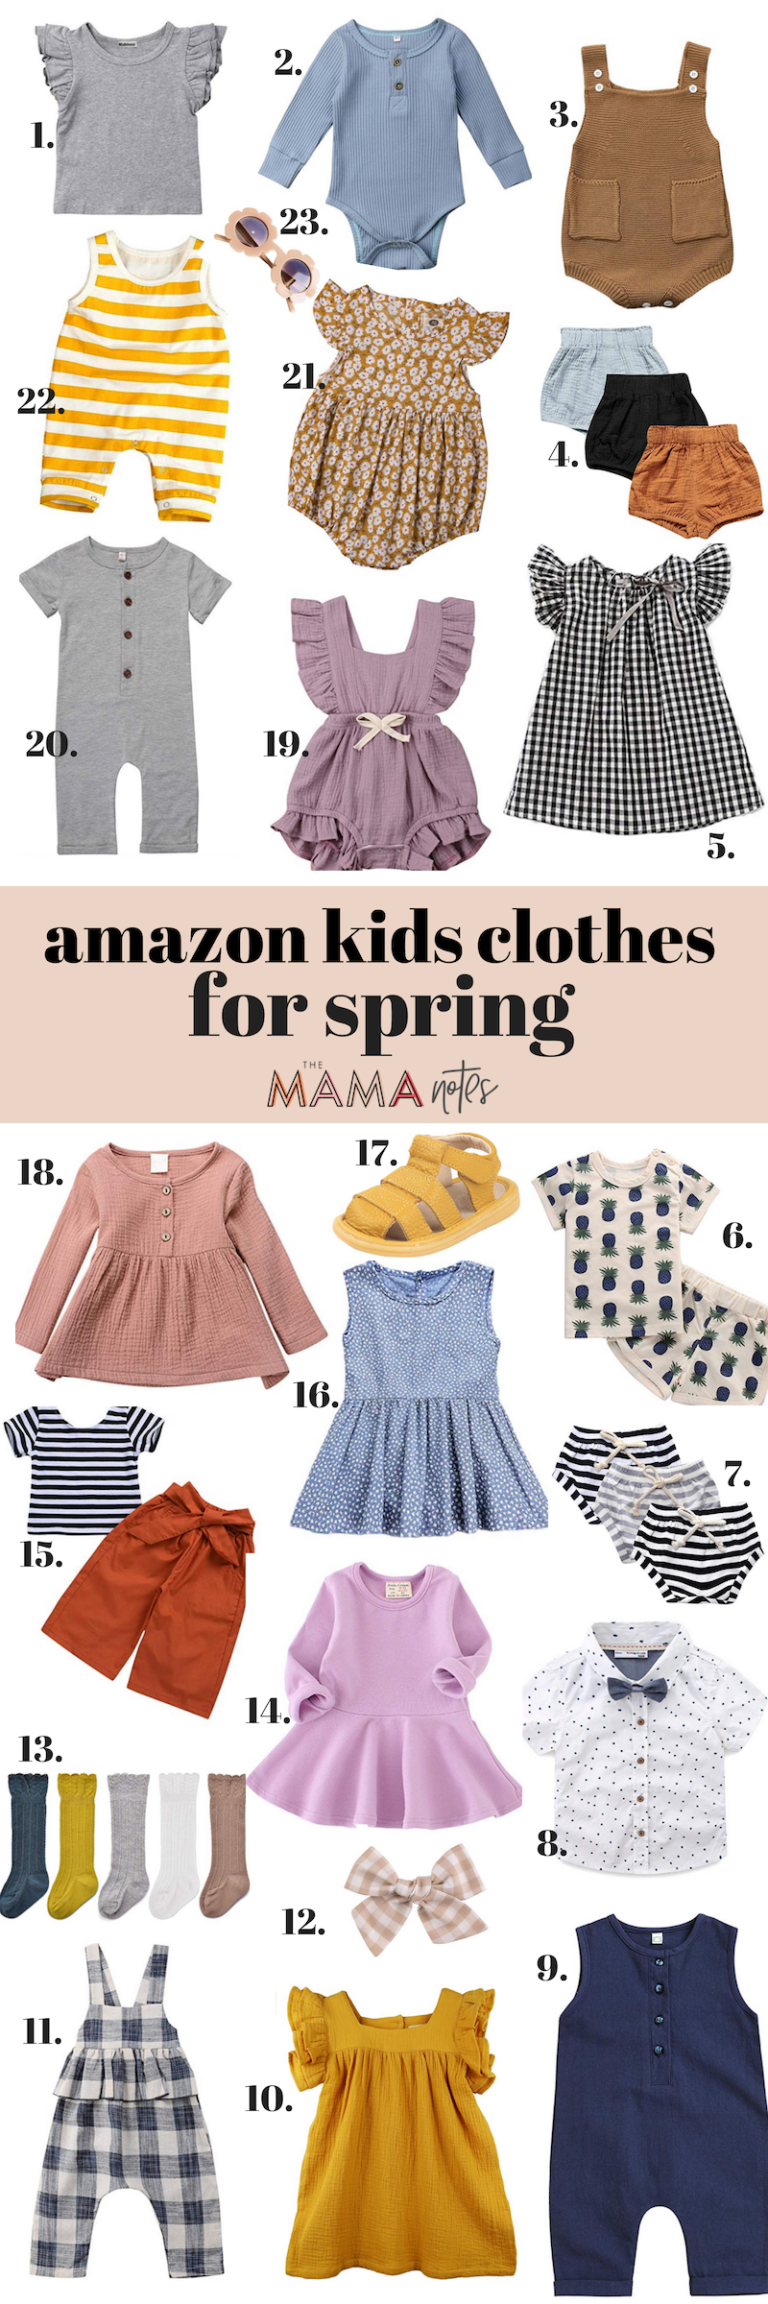 Amazon Kids Clothes For Spring 768x2304 